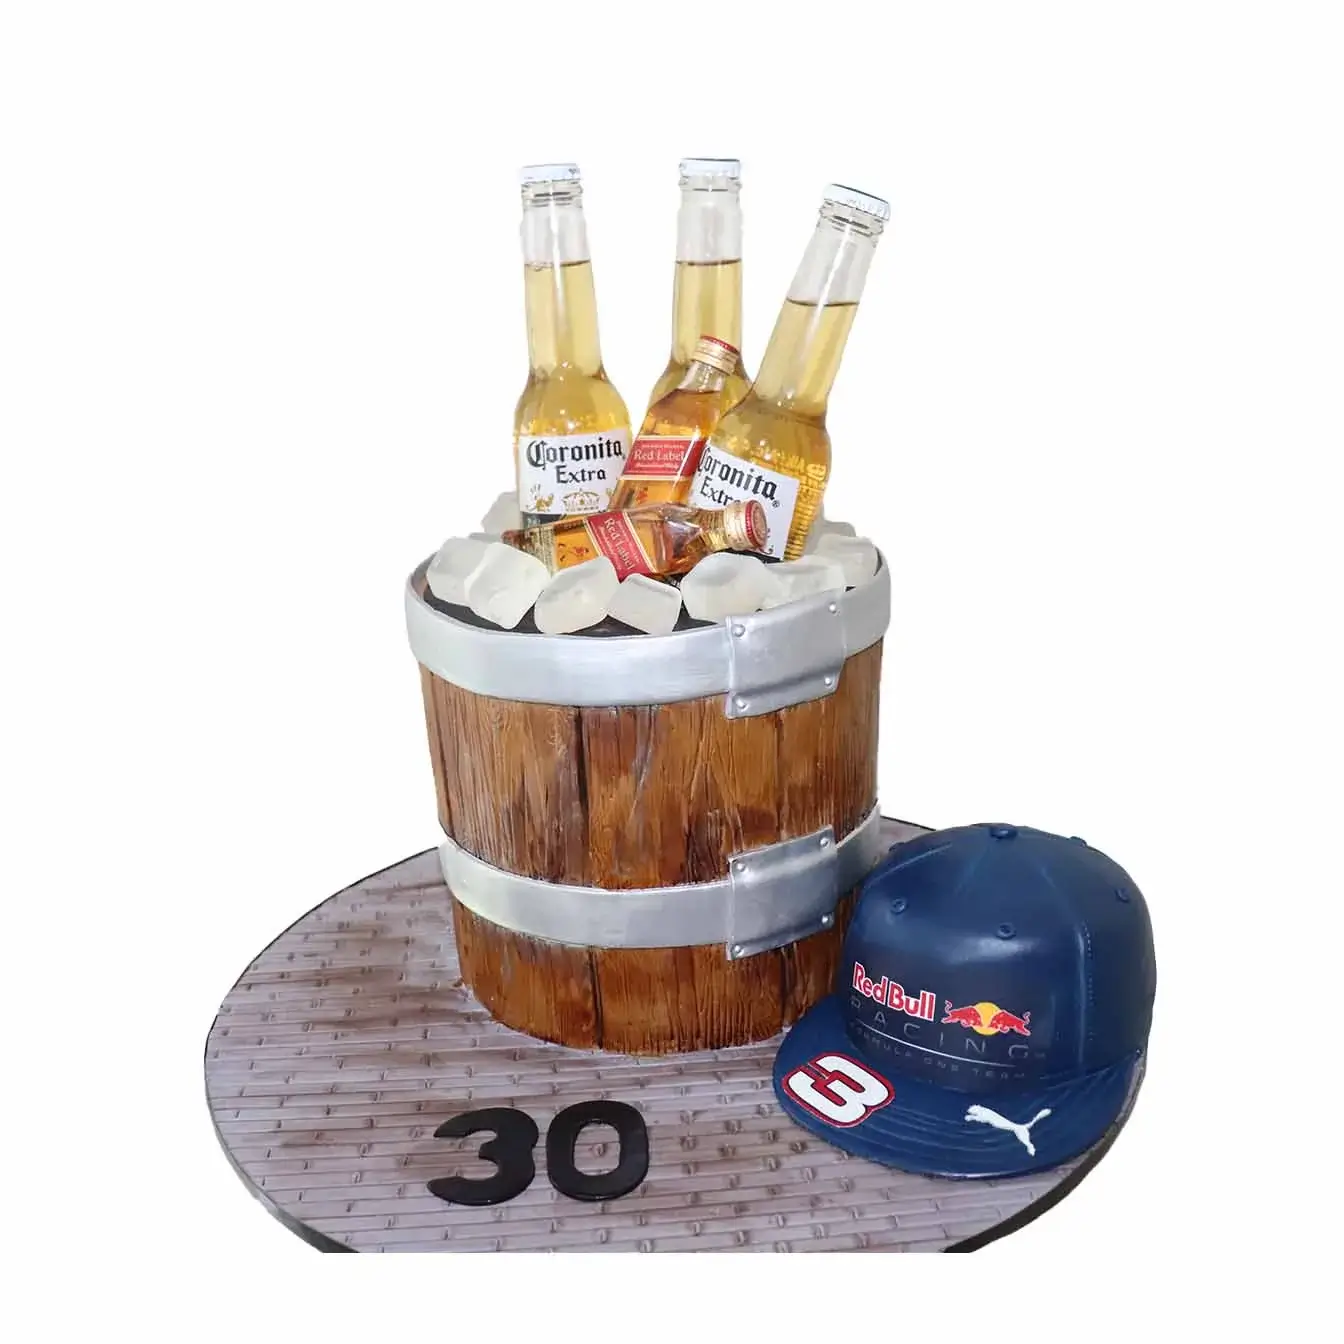 Revved-Up Racing Fuel Cake - A beer barrel cake with isomalt ice cubes, scotch, and a personalized racing cap, a unique centerpiece for motorsport enthusiasts and racing fans.